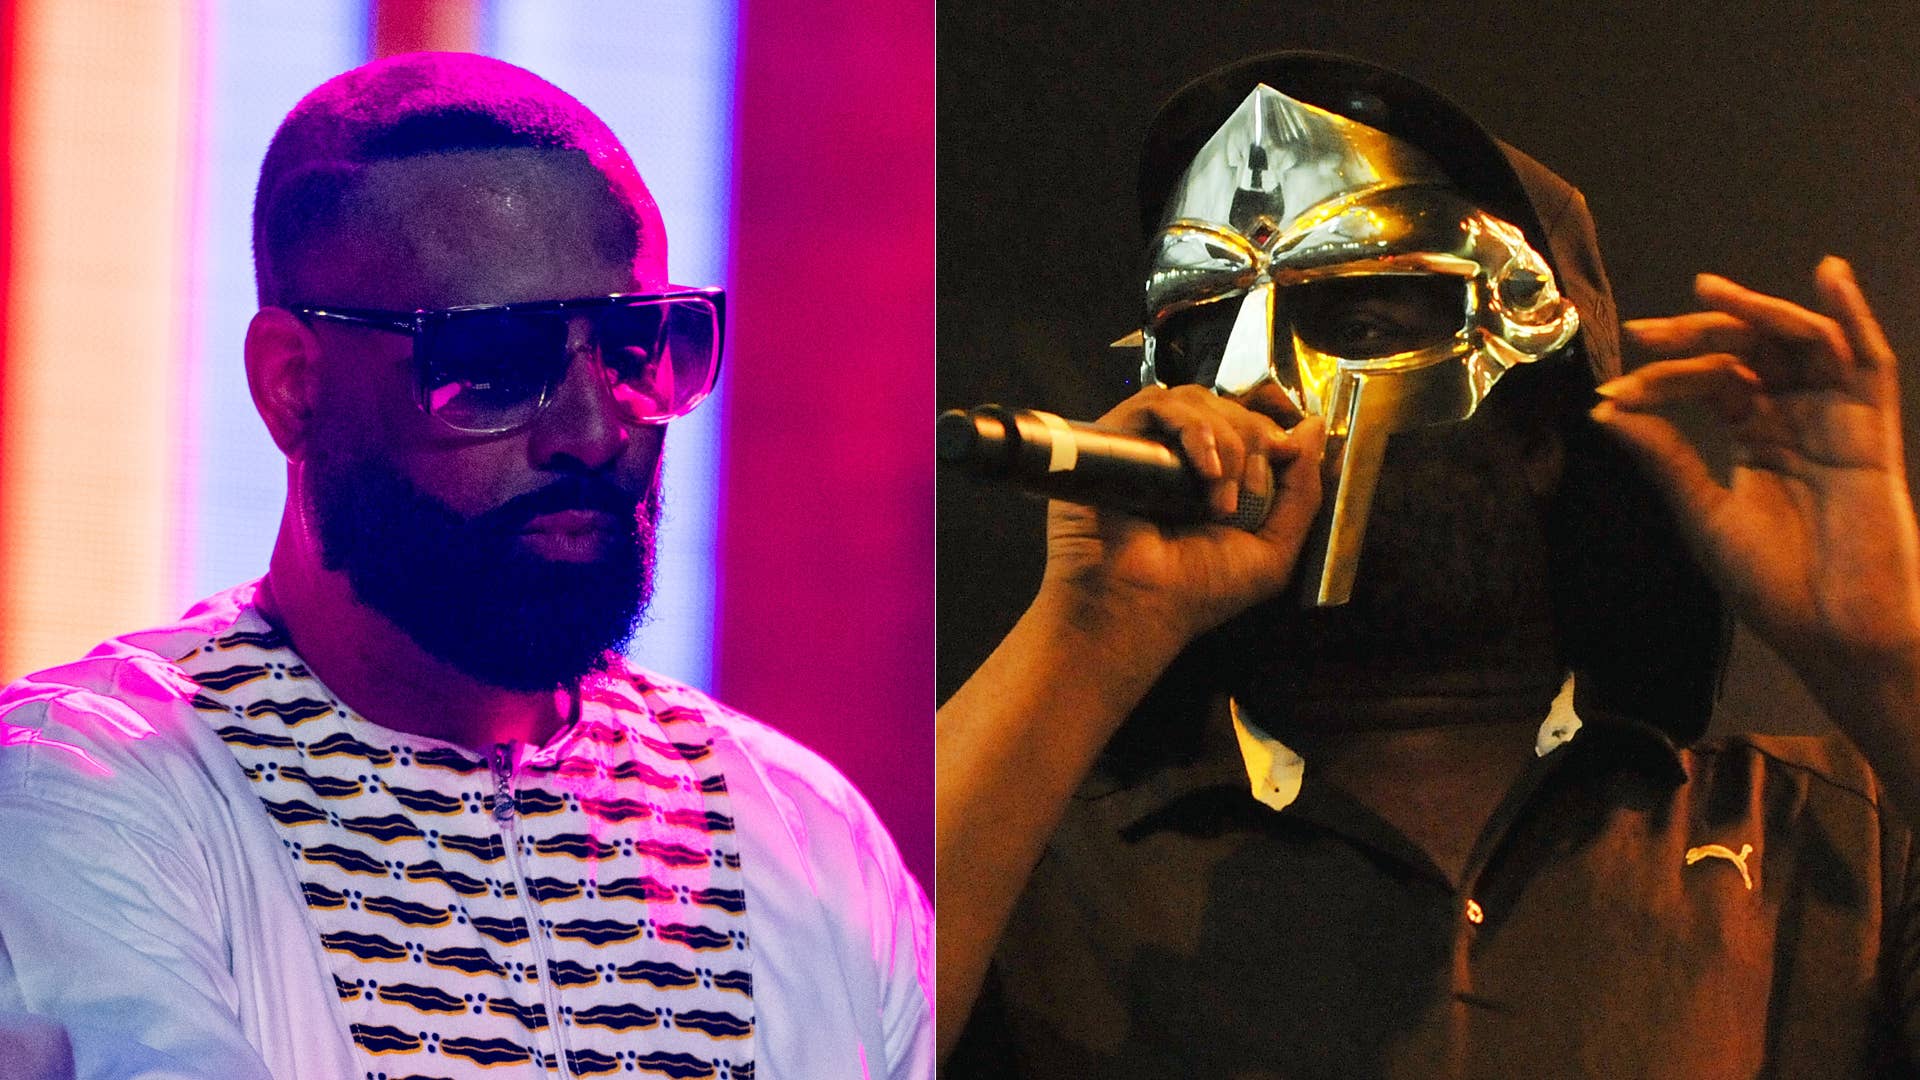 Madlib and MF DOOM, the duo that makes up Madvillain.